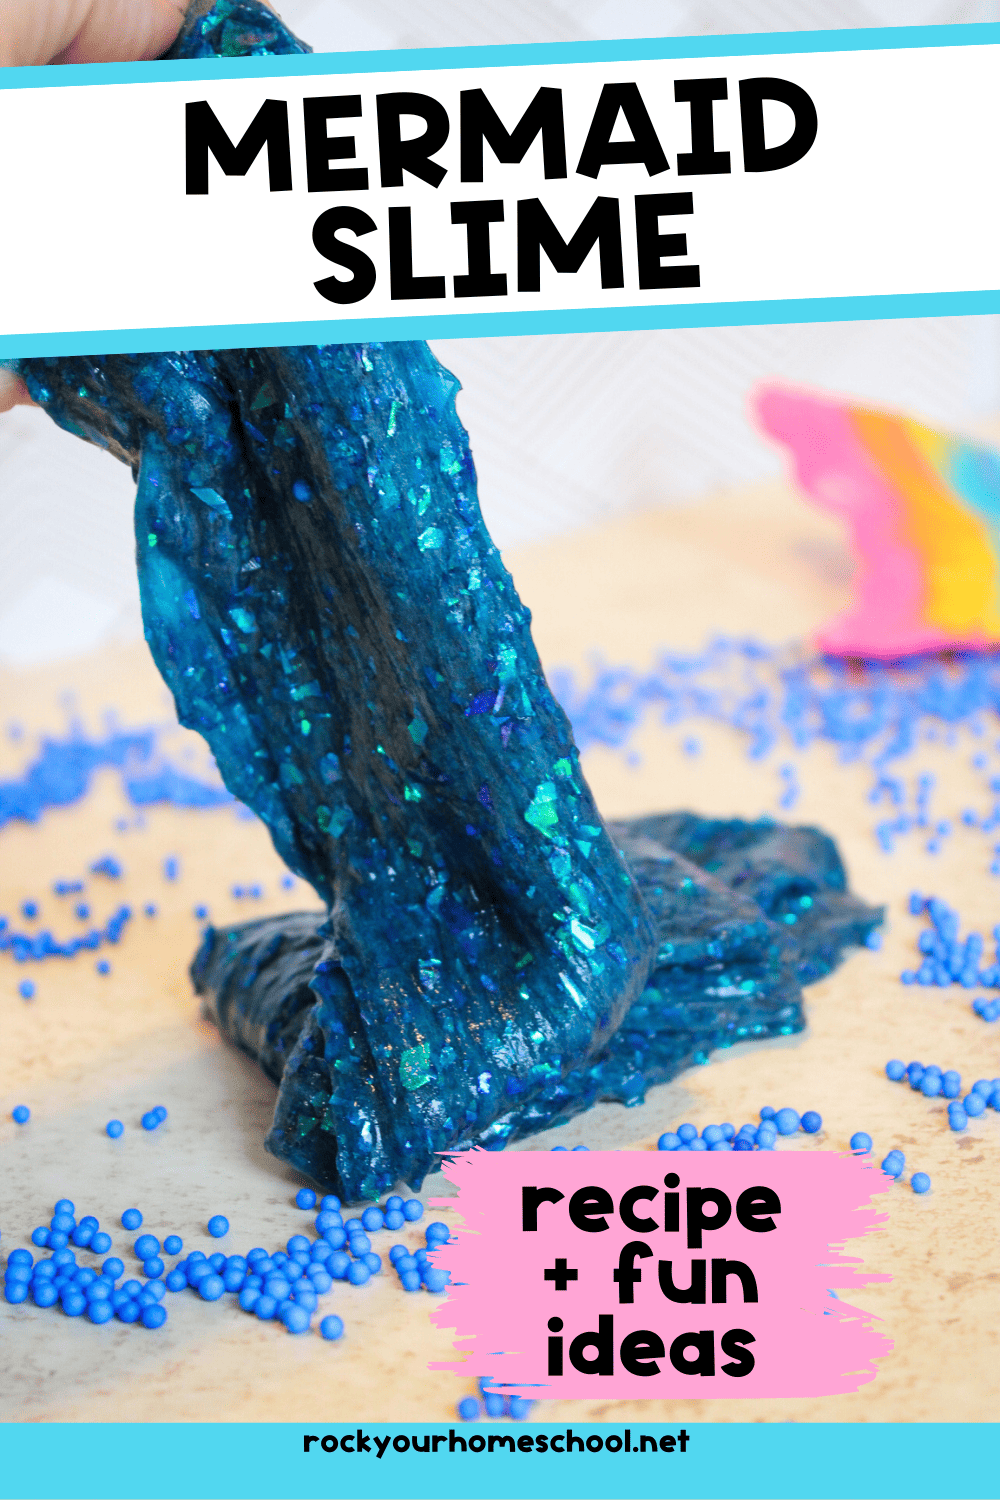 Mermaid Slime: How to Make for Sparkly DIY Fun (Free Recipe)